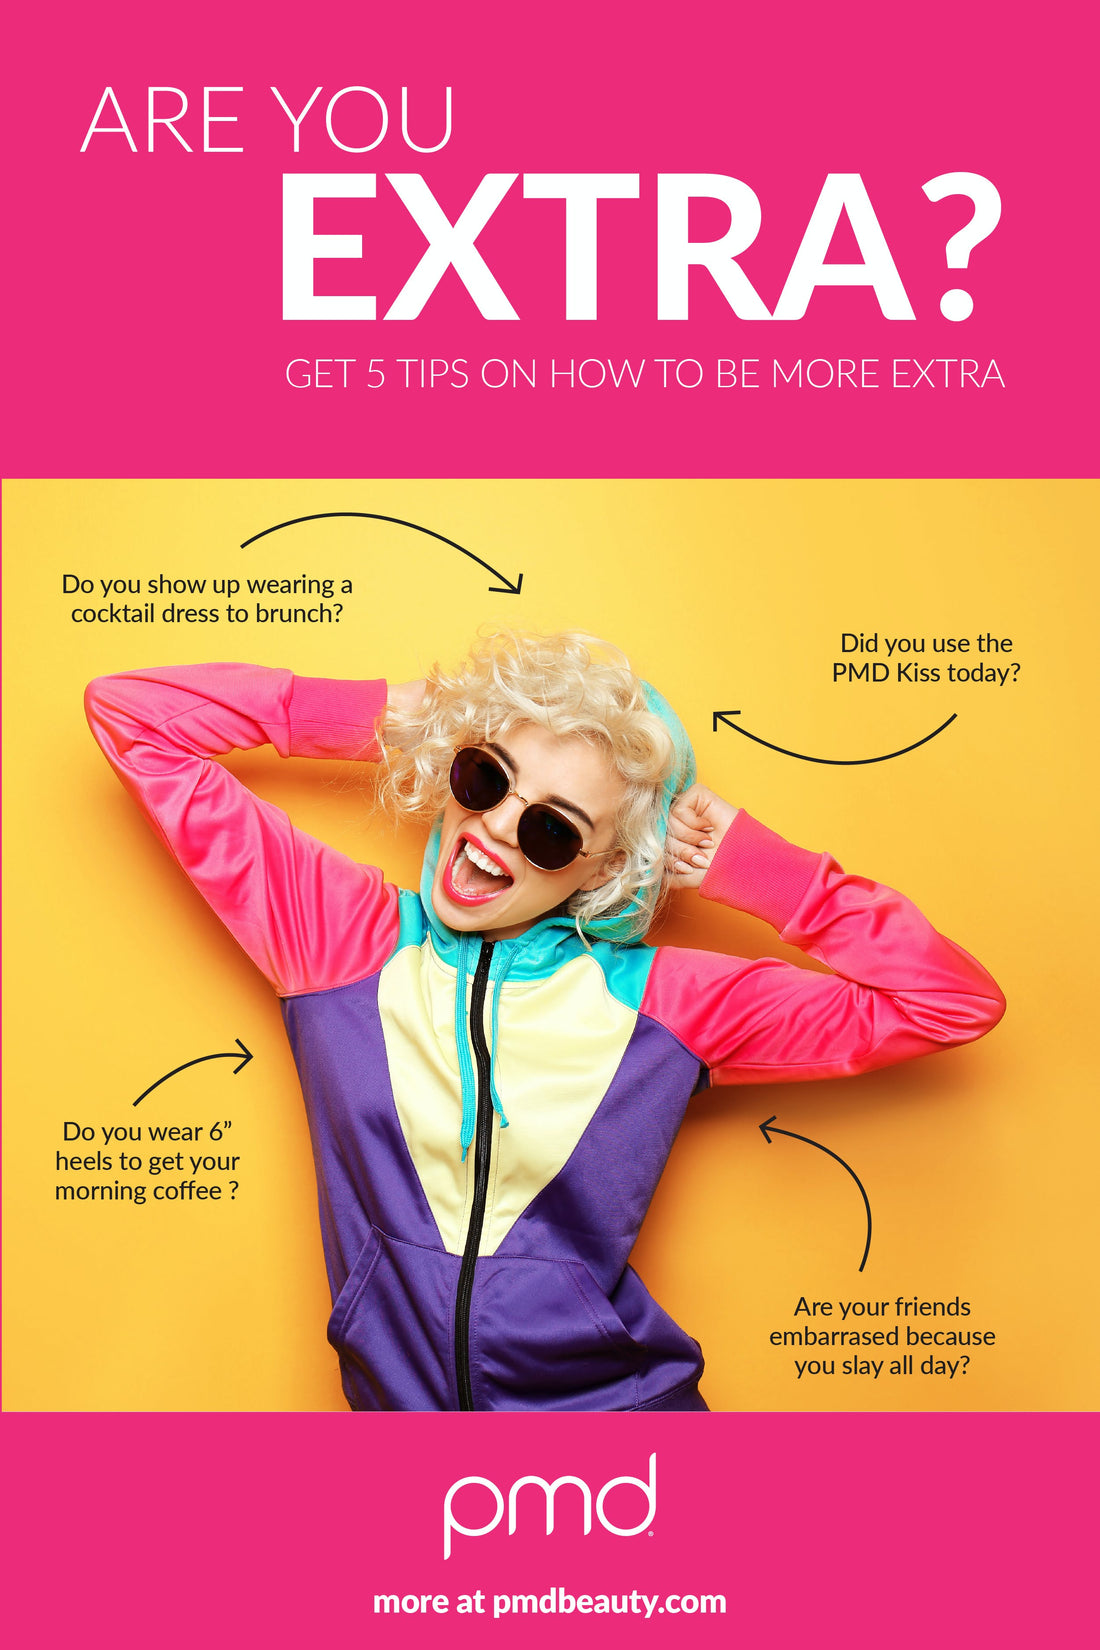 Are You Extra? Get 5 Tips on How To Be More Extra